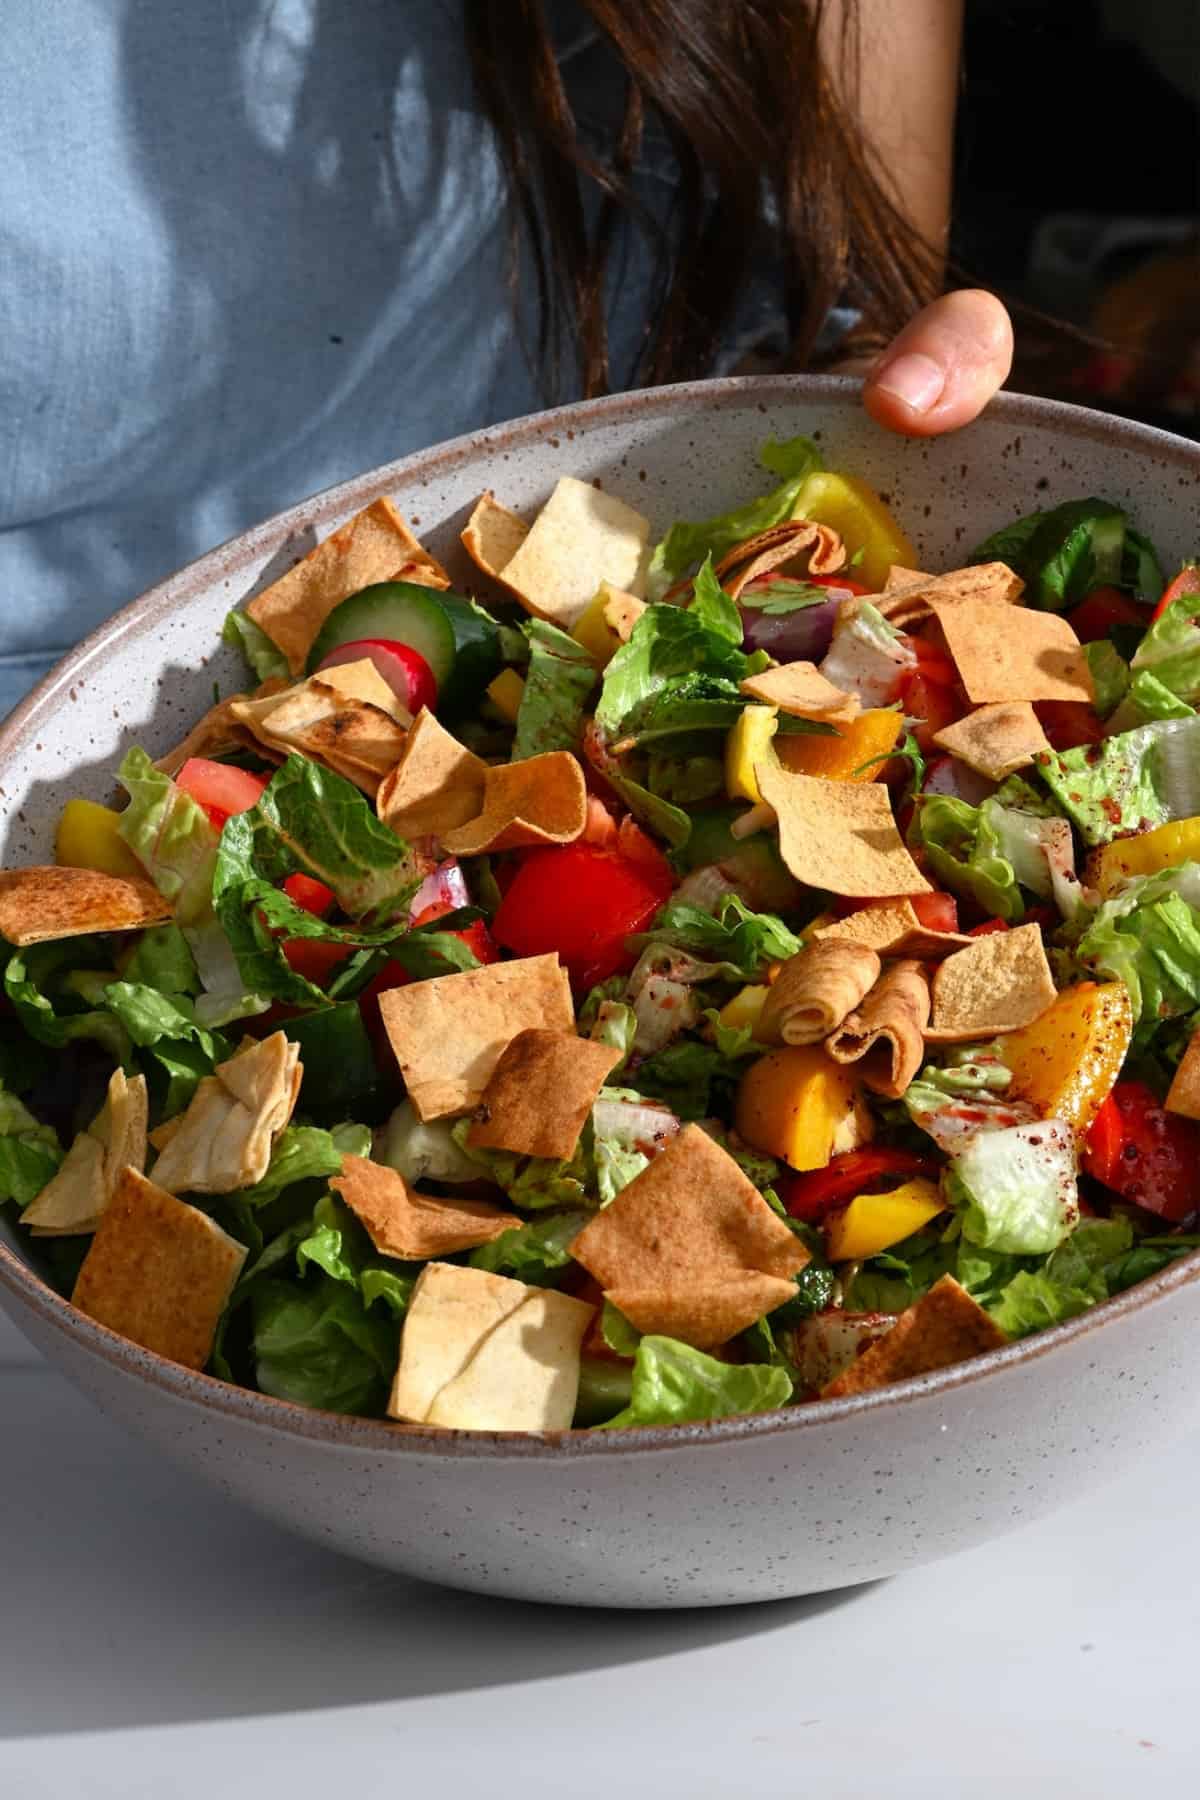 Fattoush salad topped with pita chips